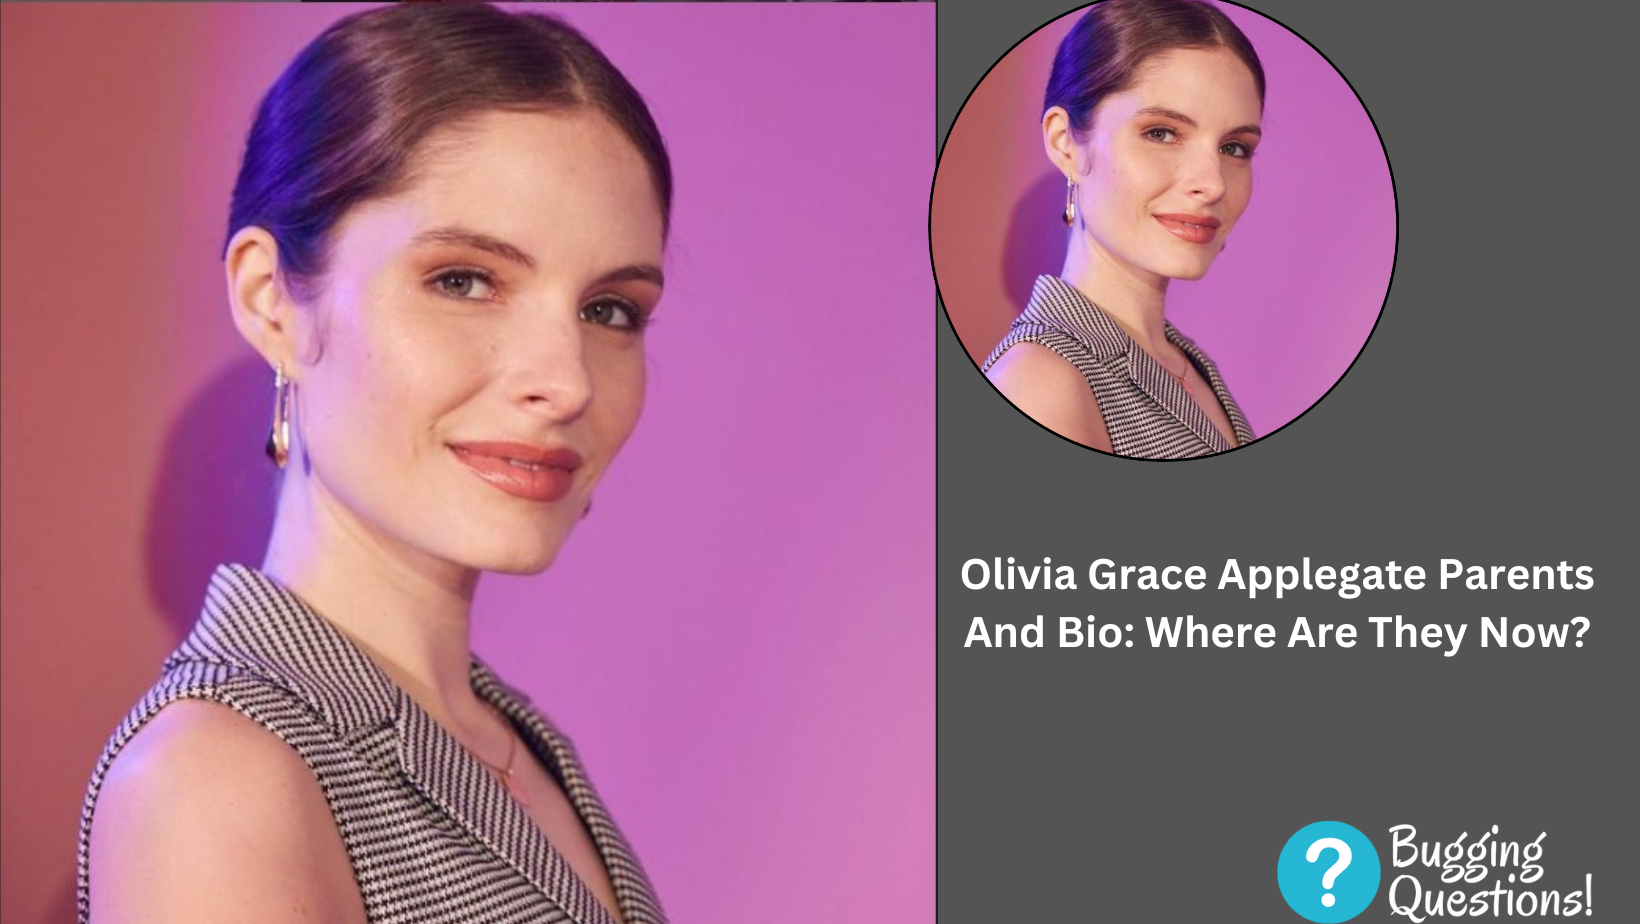 Olivia Grace Applegate Parents And Bio: Where Are They Now?